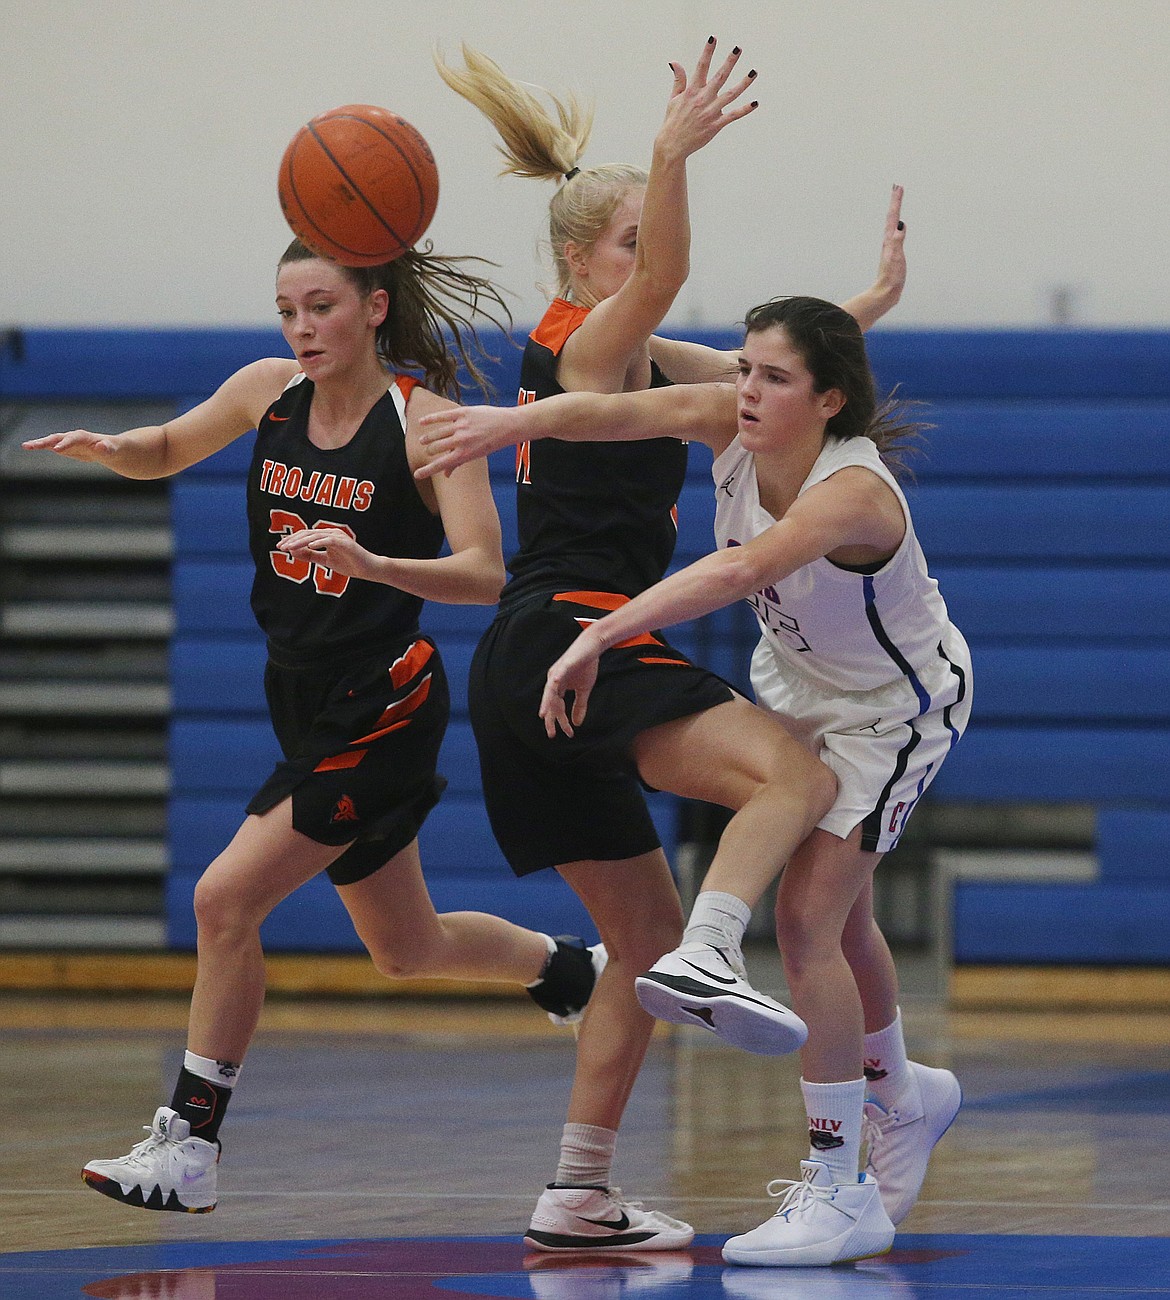 Coeur d&#146;Alene&#146;s Skylar Burke passes the ball to a teammate while defended by Jenna Gardiner of Post Falls. (LOREN BENOIT/Press)